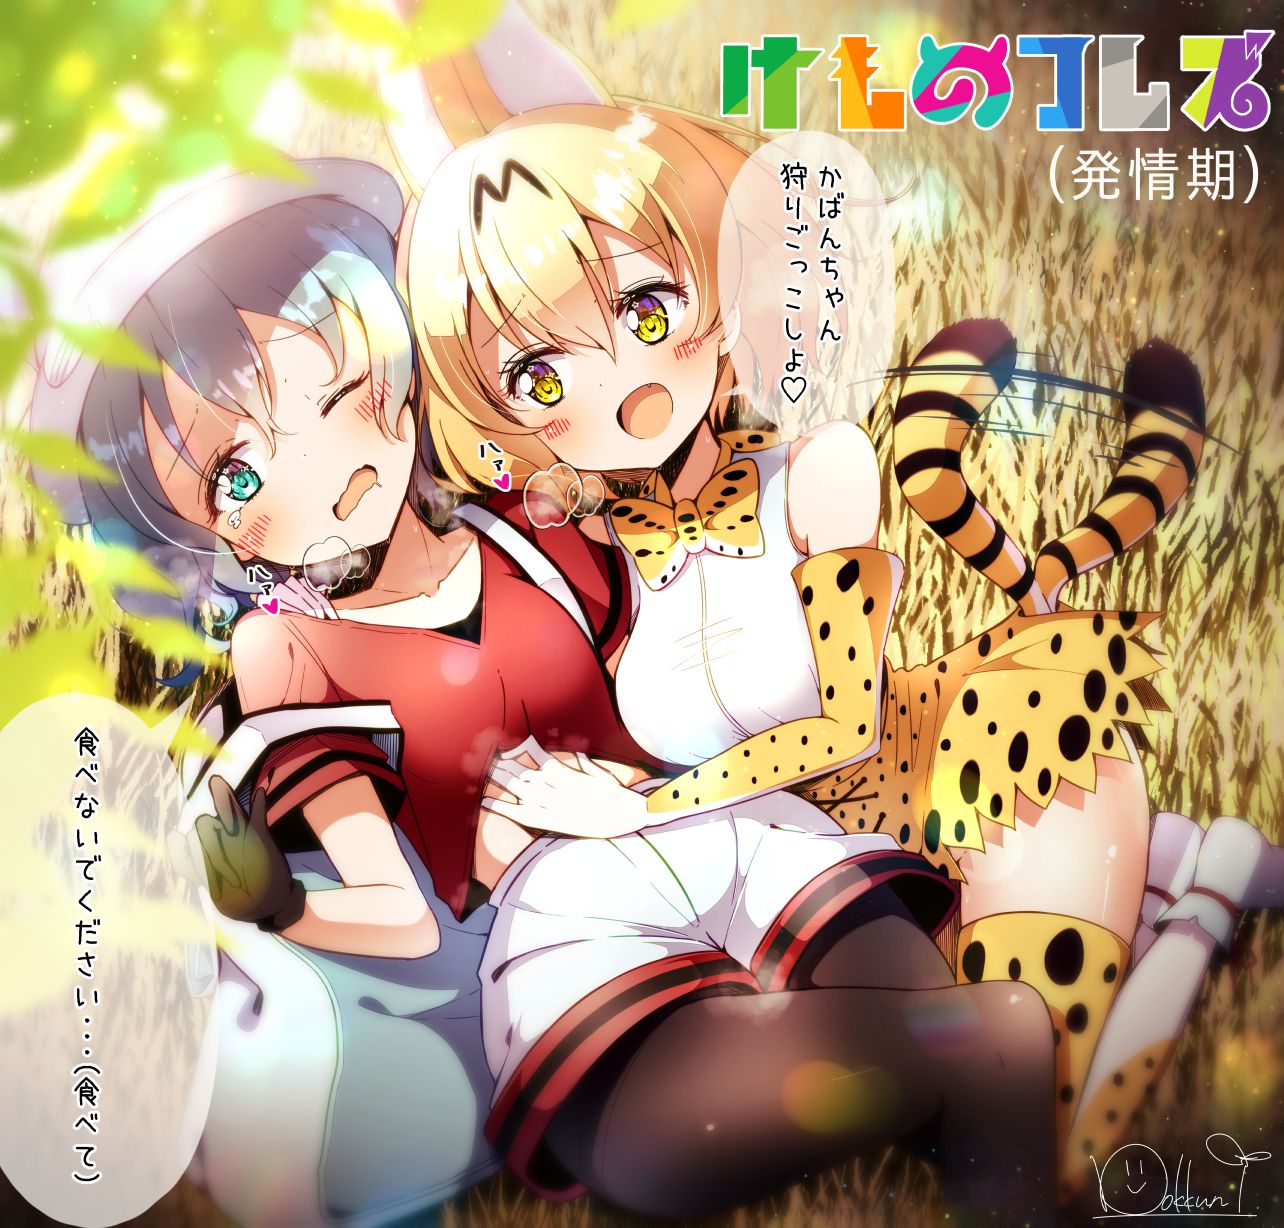 Bag-Chan x Serval Chan Ho was cute stiff image posting.! [Friends of the beast, the beast friends 18